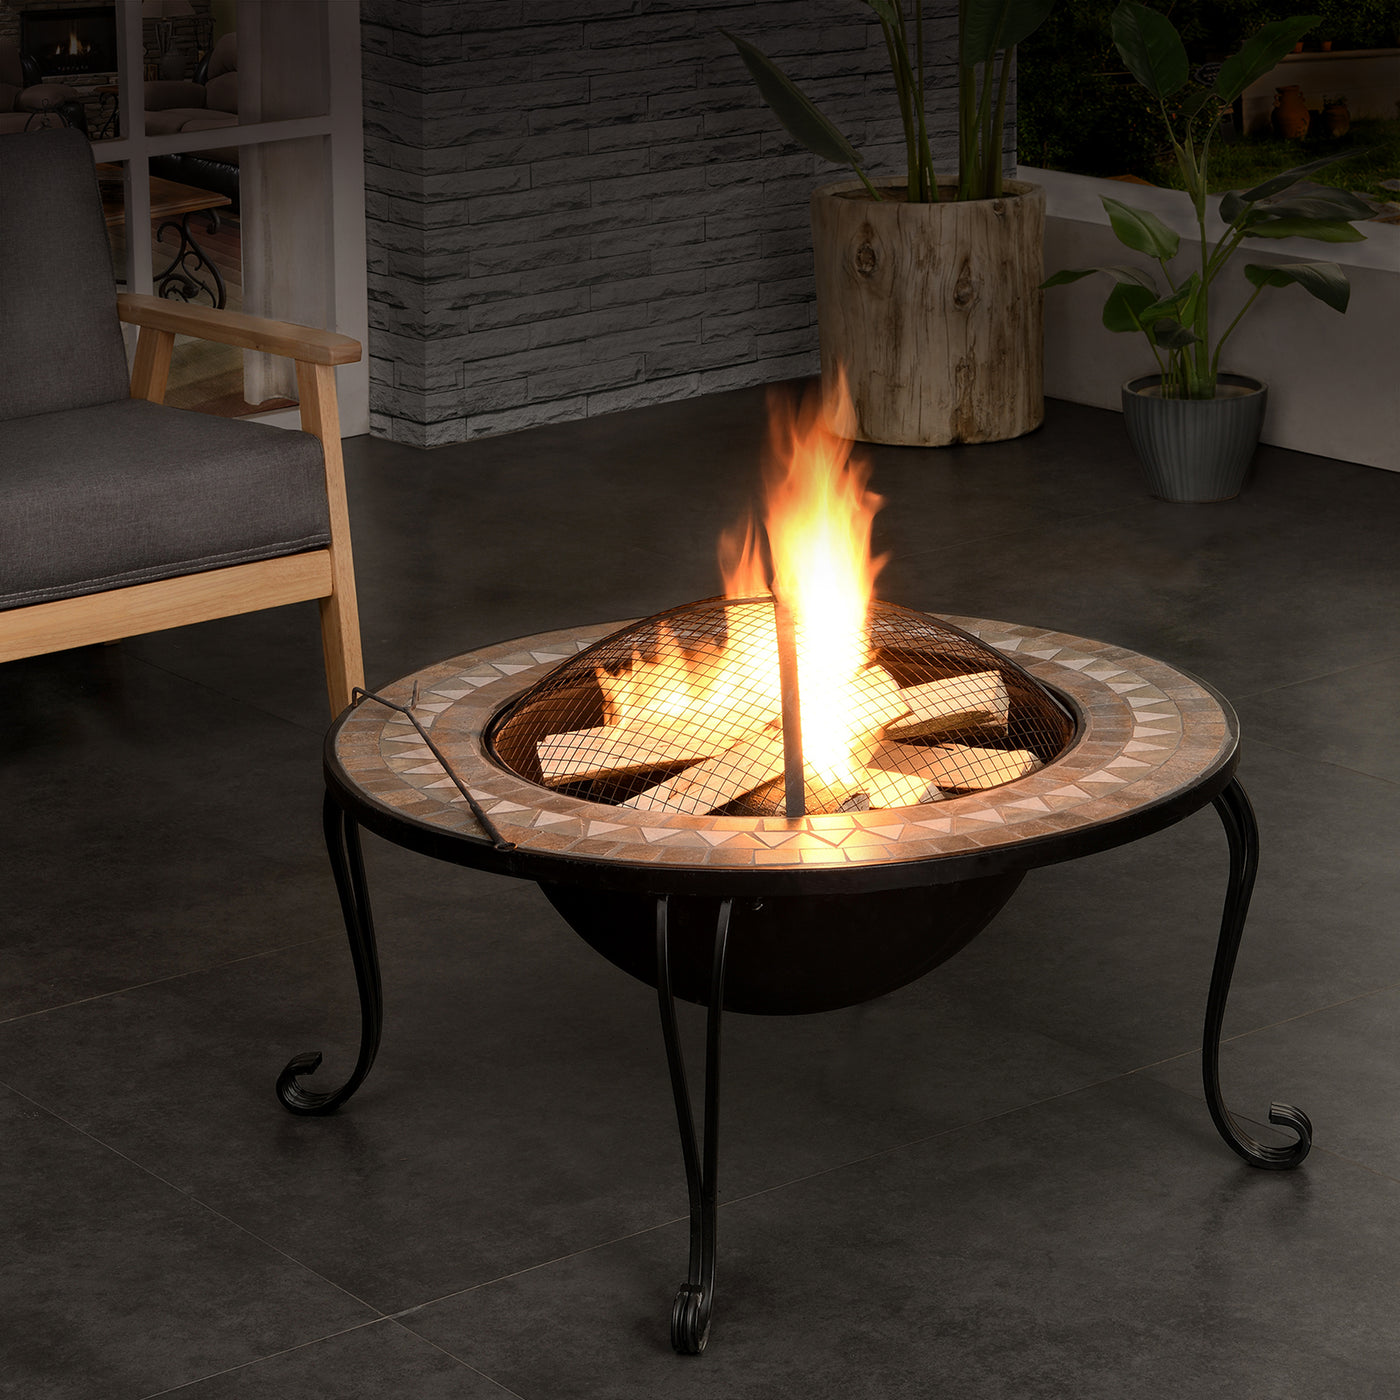 FirsTime & Co. Brown Artemis Fire Pit With Screen Lid, Industrial Style, Made of Mosaic Tiles